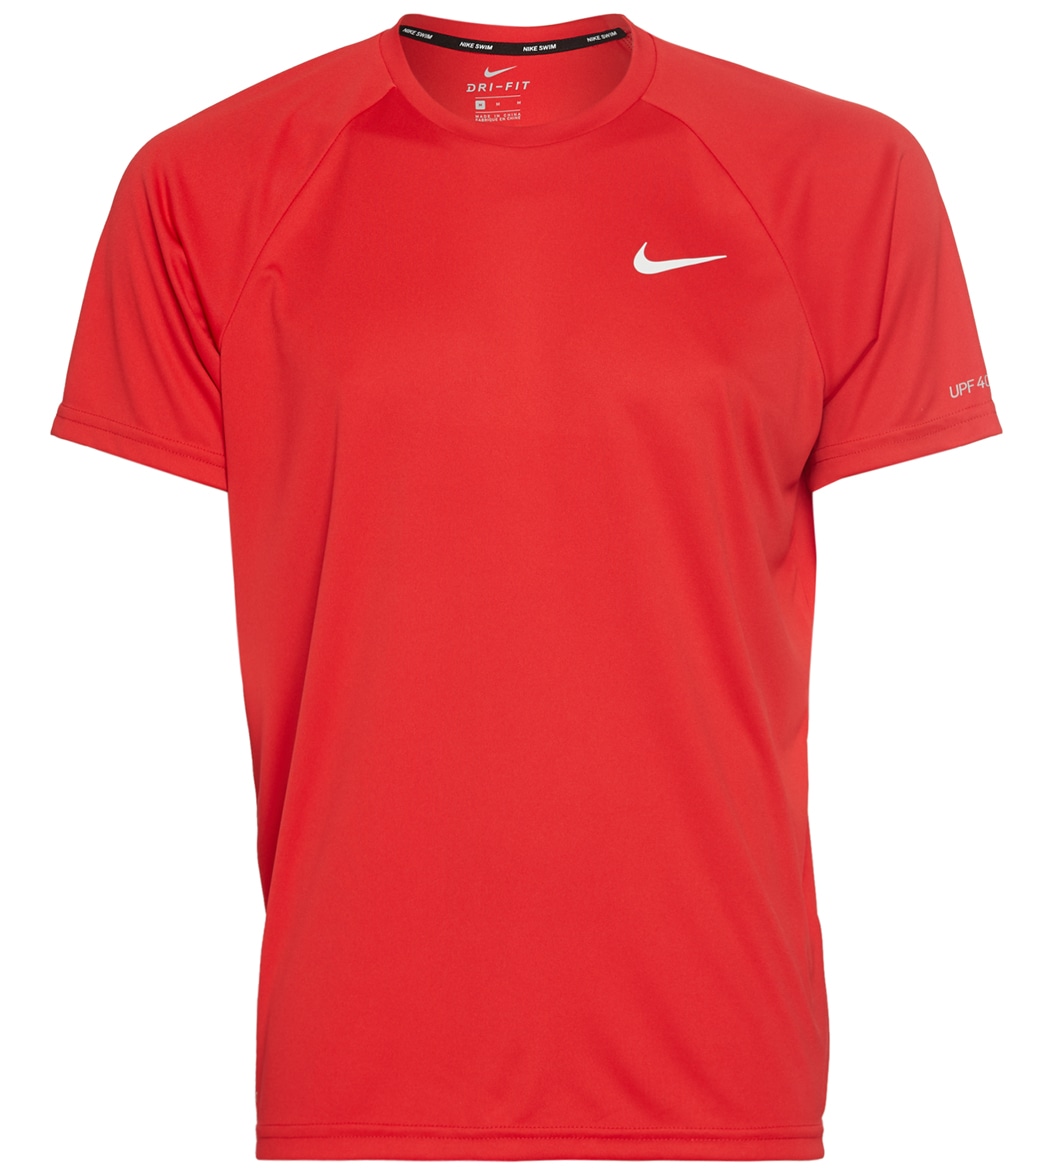 Nike Men's Essential Short Sleeve Hydroguard Shirt - University Red Small Polyester - Swimoutlet.com